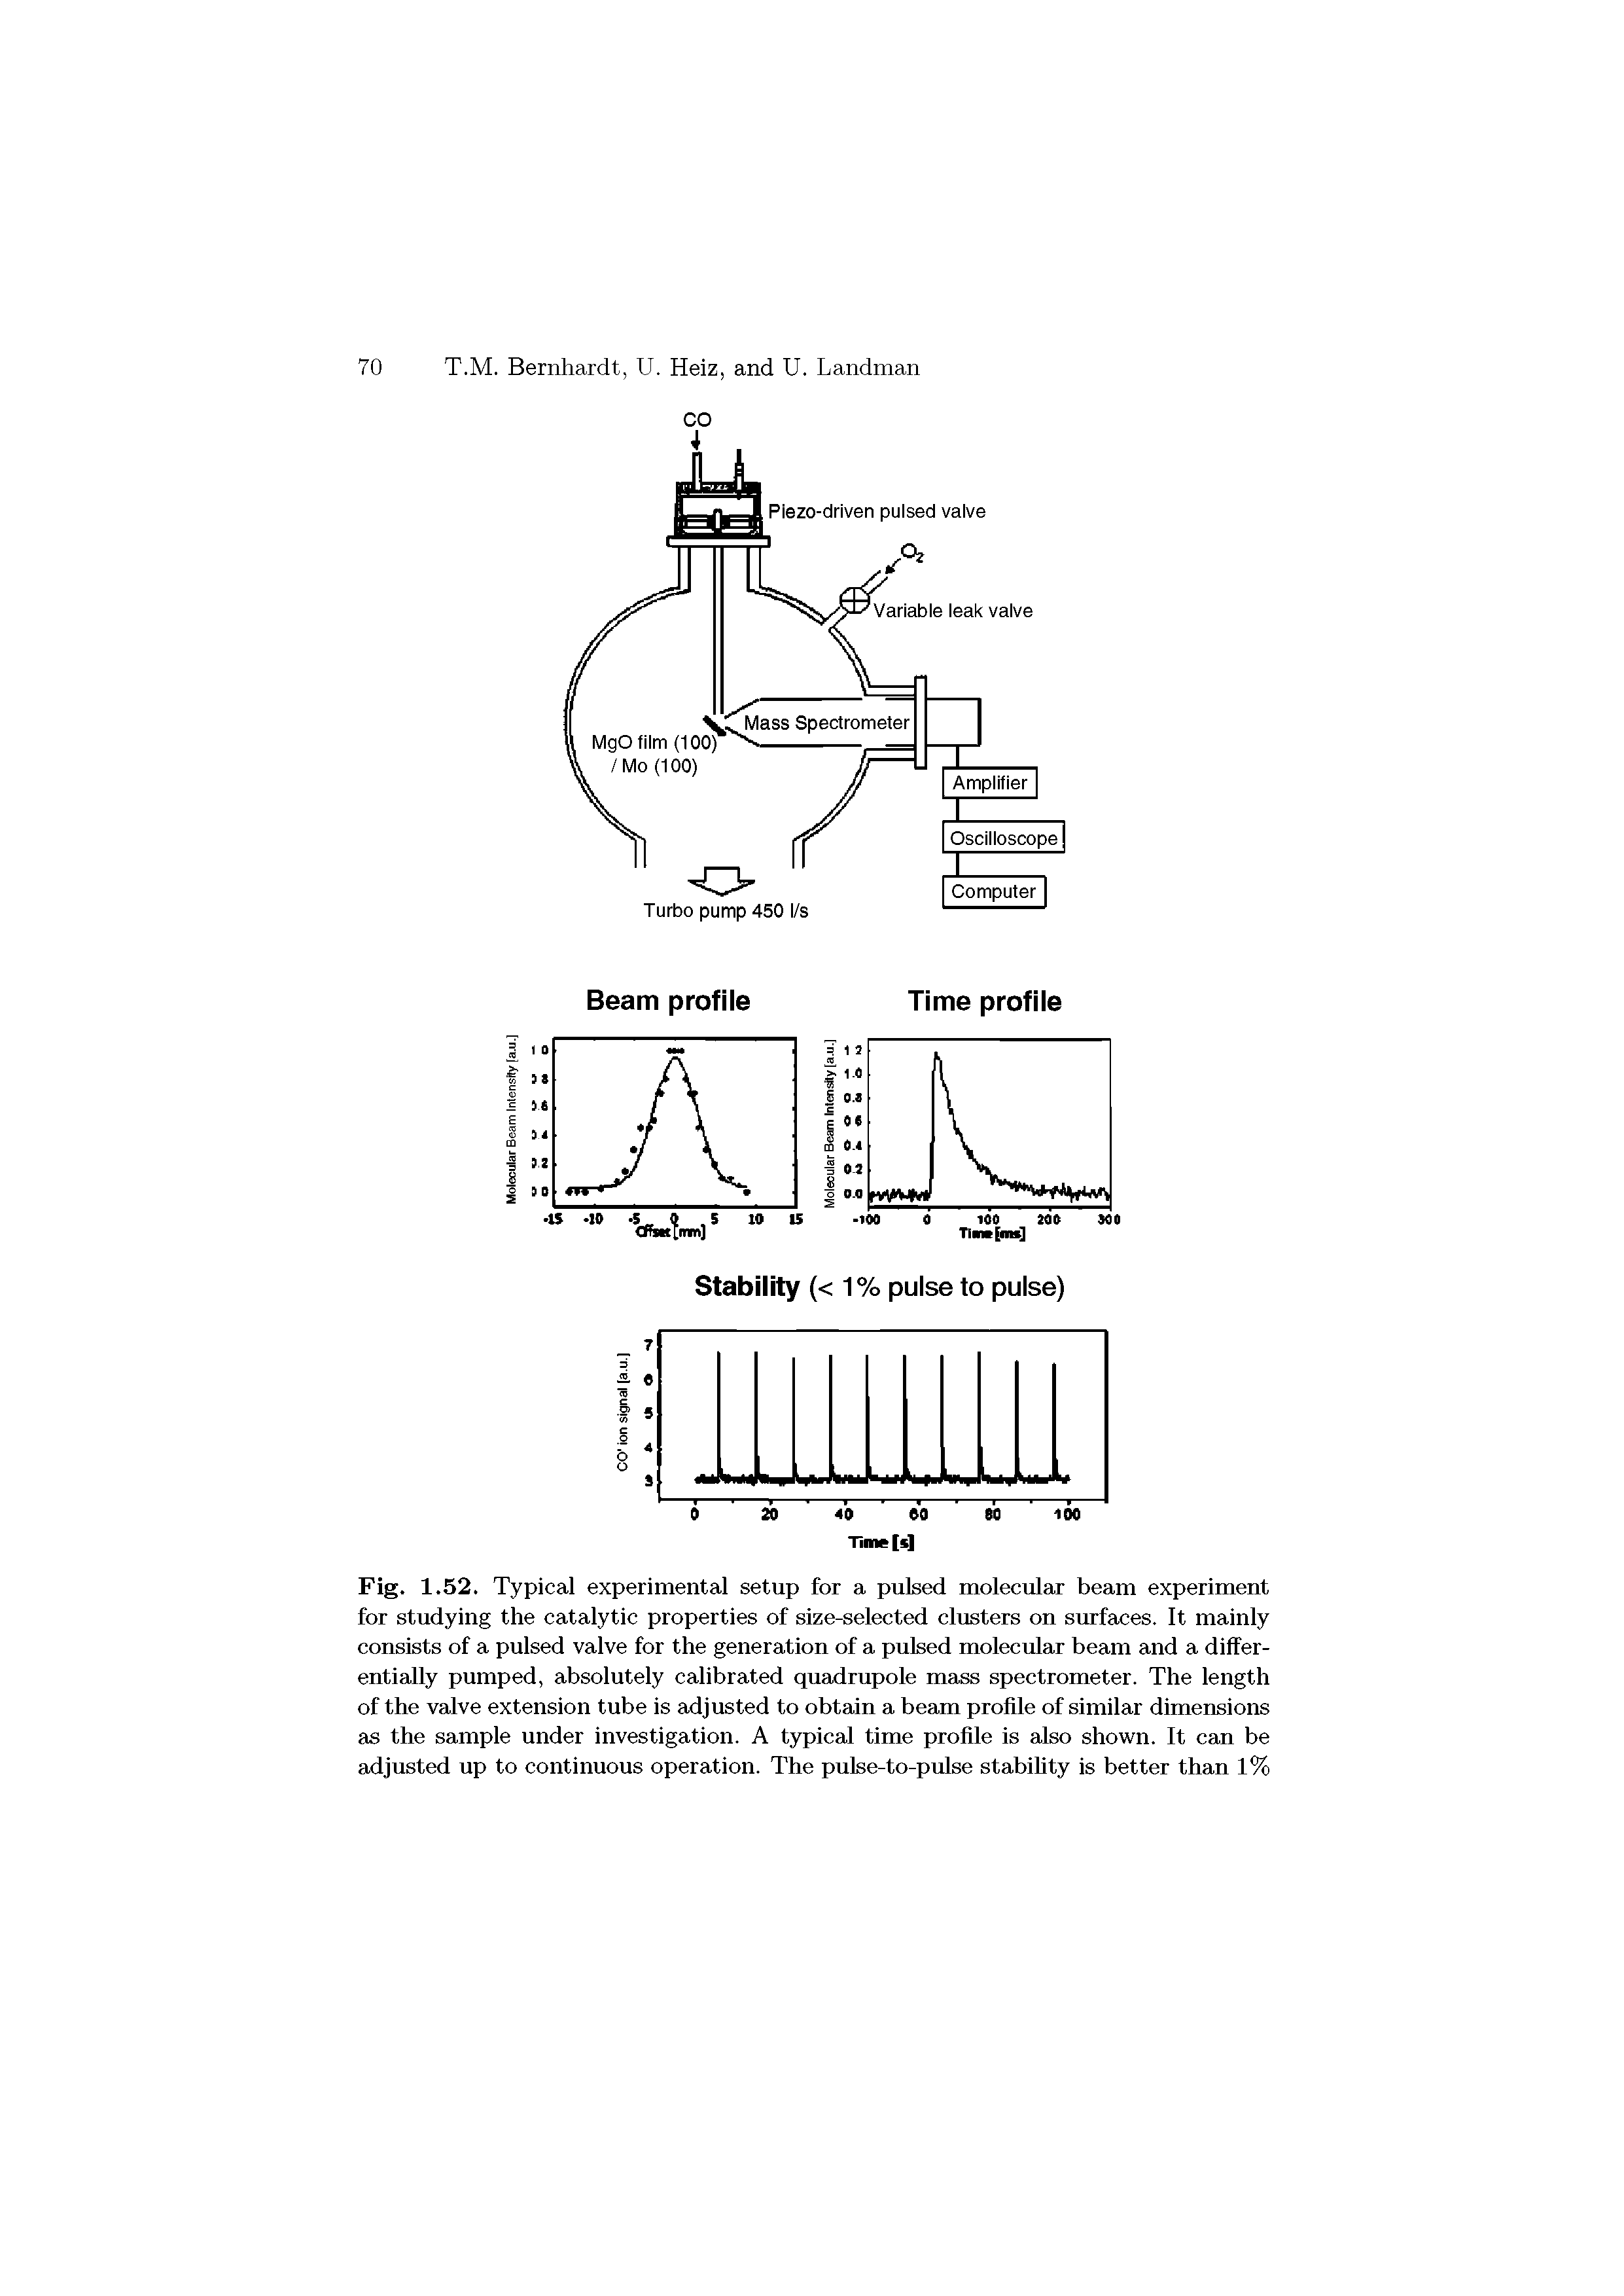 Fig. 1.52. Typical experimental setup for a pulsed molecular beam experiment for studying the catalytic properties of size-selected clusters on surfaces. It mainly consists of a pulsed valve for the generation of a pulsed molecular beam and a differentially pumped, absolutely calibrated quadrupole mass spectrometer. The length of the valve extension tube is adjusted to obtain a beam profile of similar dimensions as the sample under investigation. A typical time profile is also shown. It can be adjusted up to continuous operation. The pulse-to-pulse stability is better than 1%...